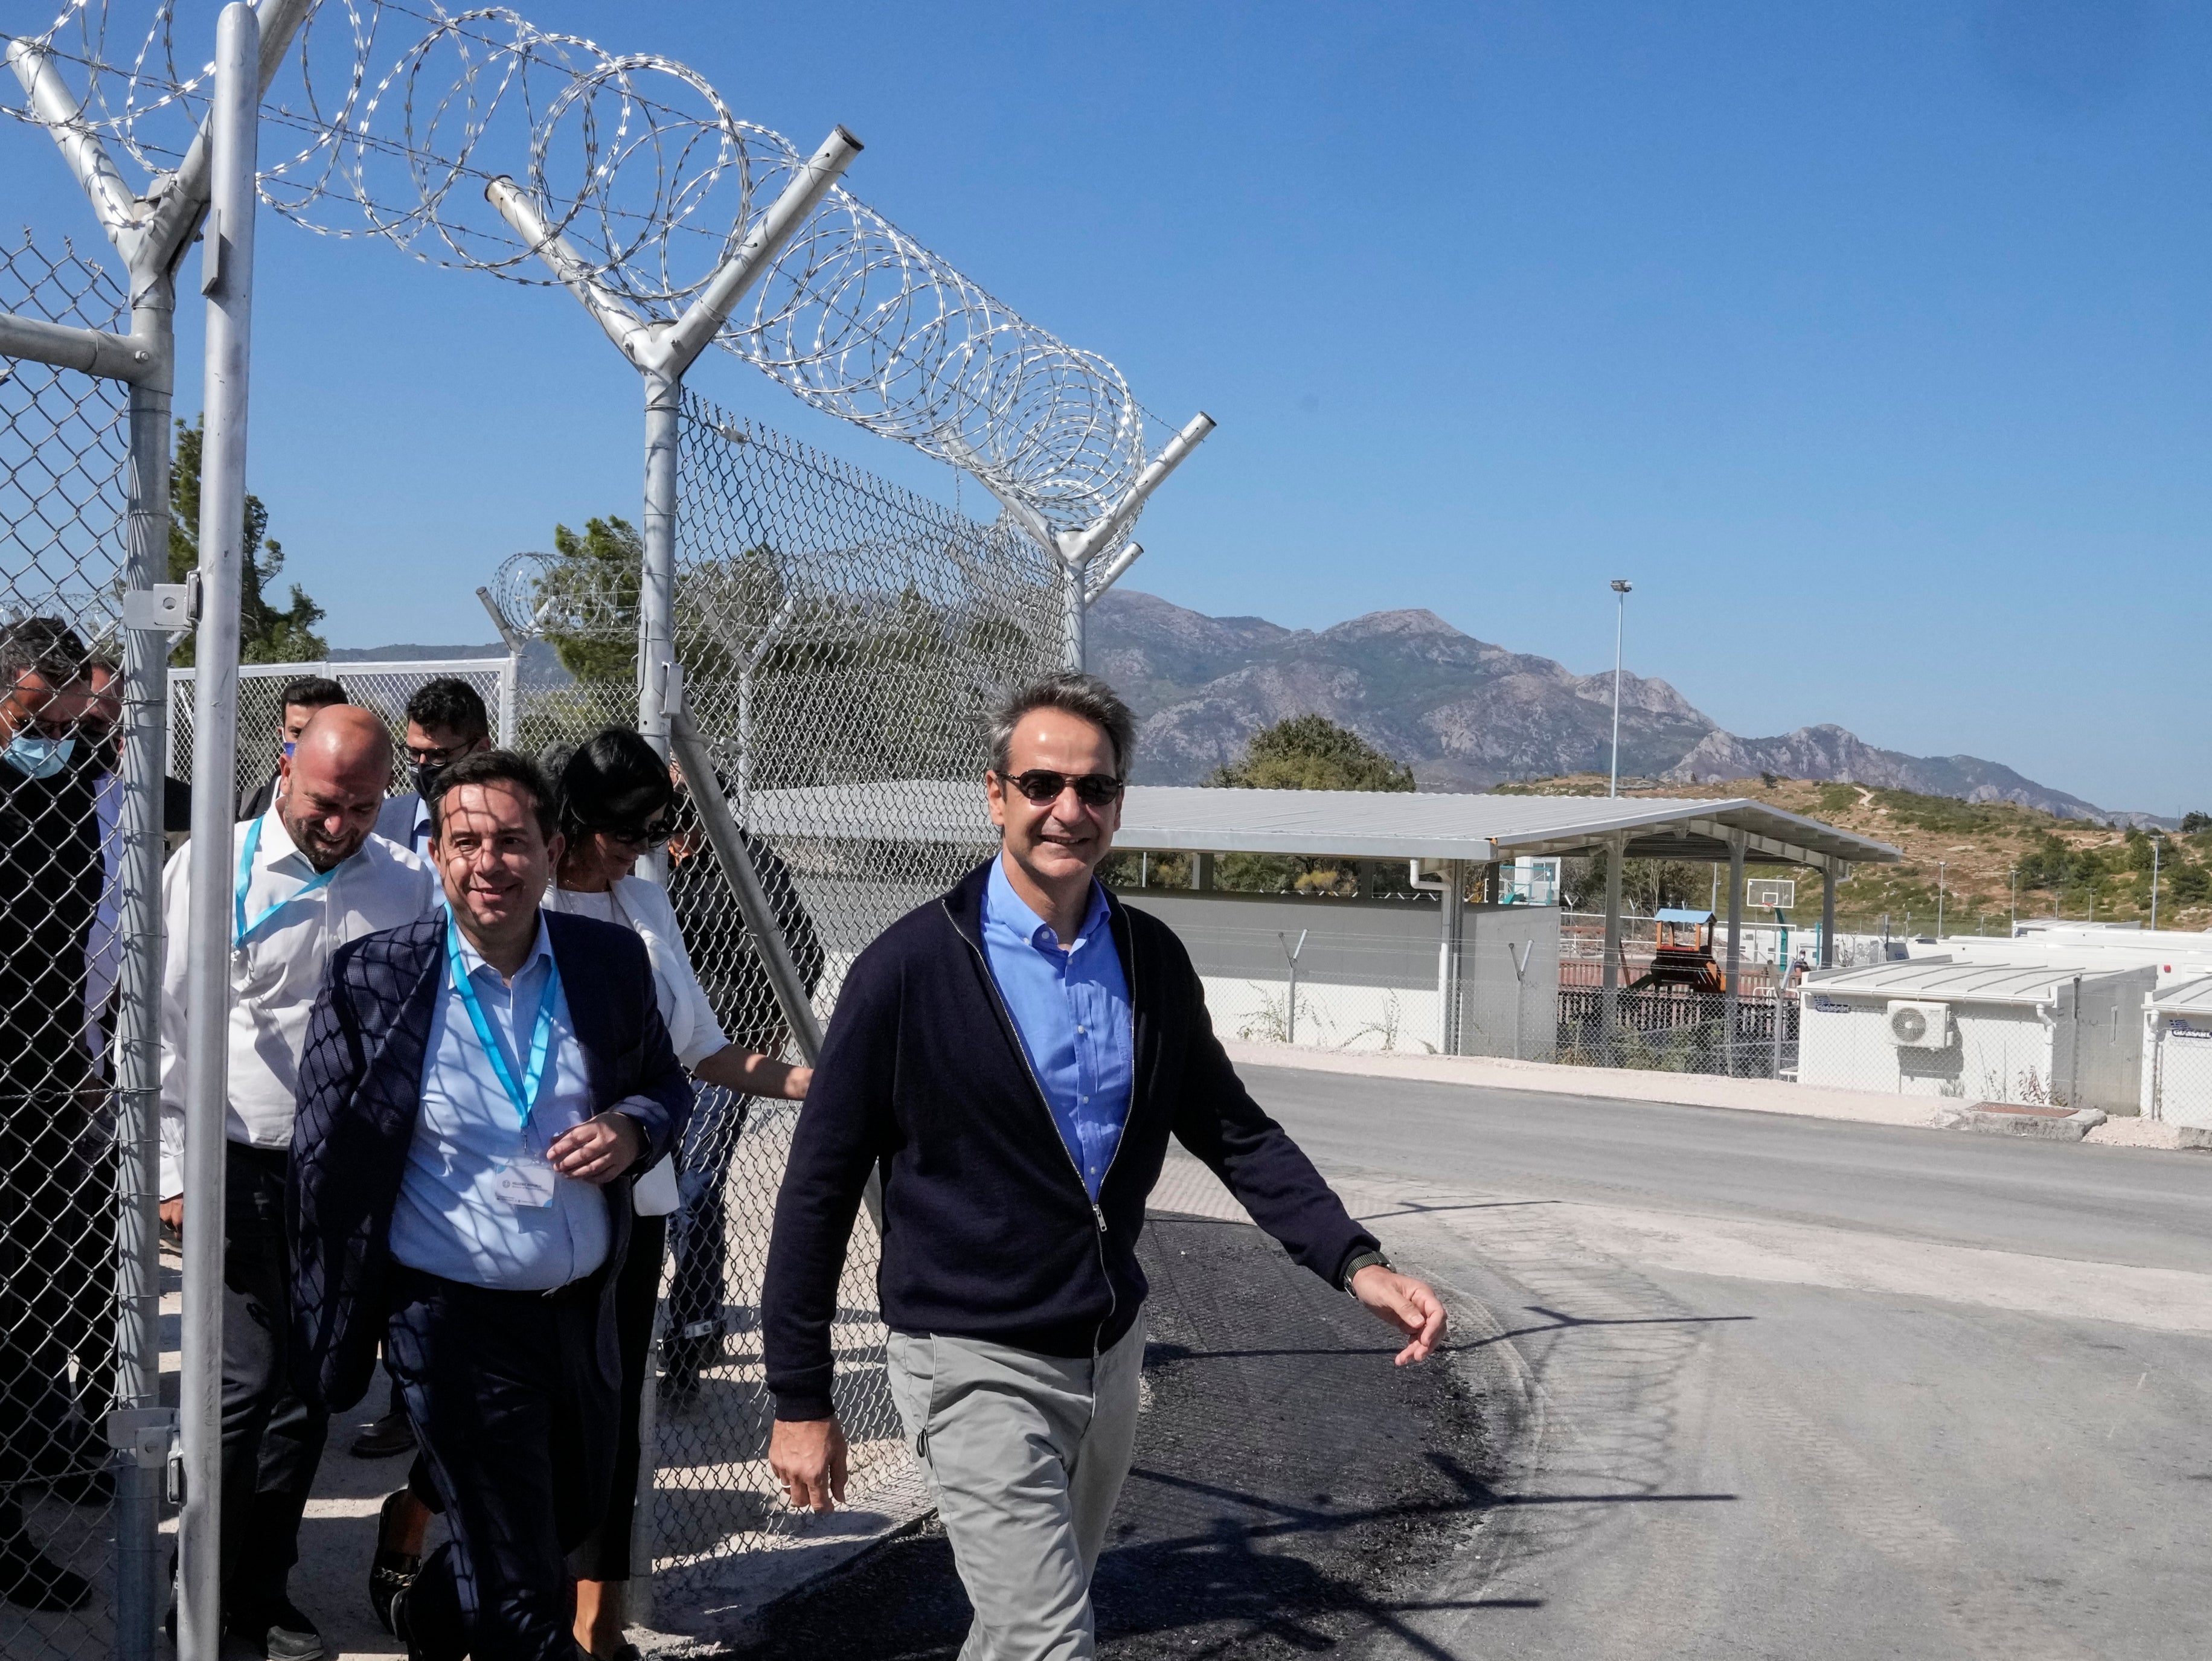 Kyriakos Mitsotakis claimed his policies had ‘crushed’ migrant-smuggling networks